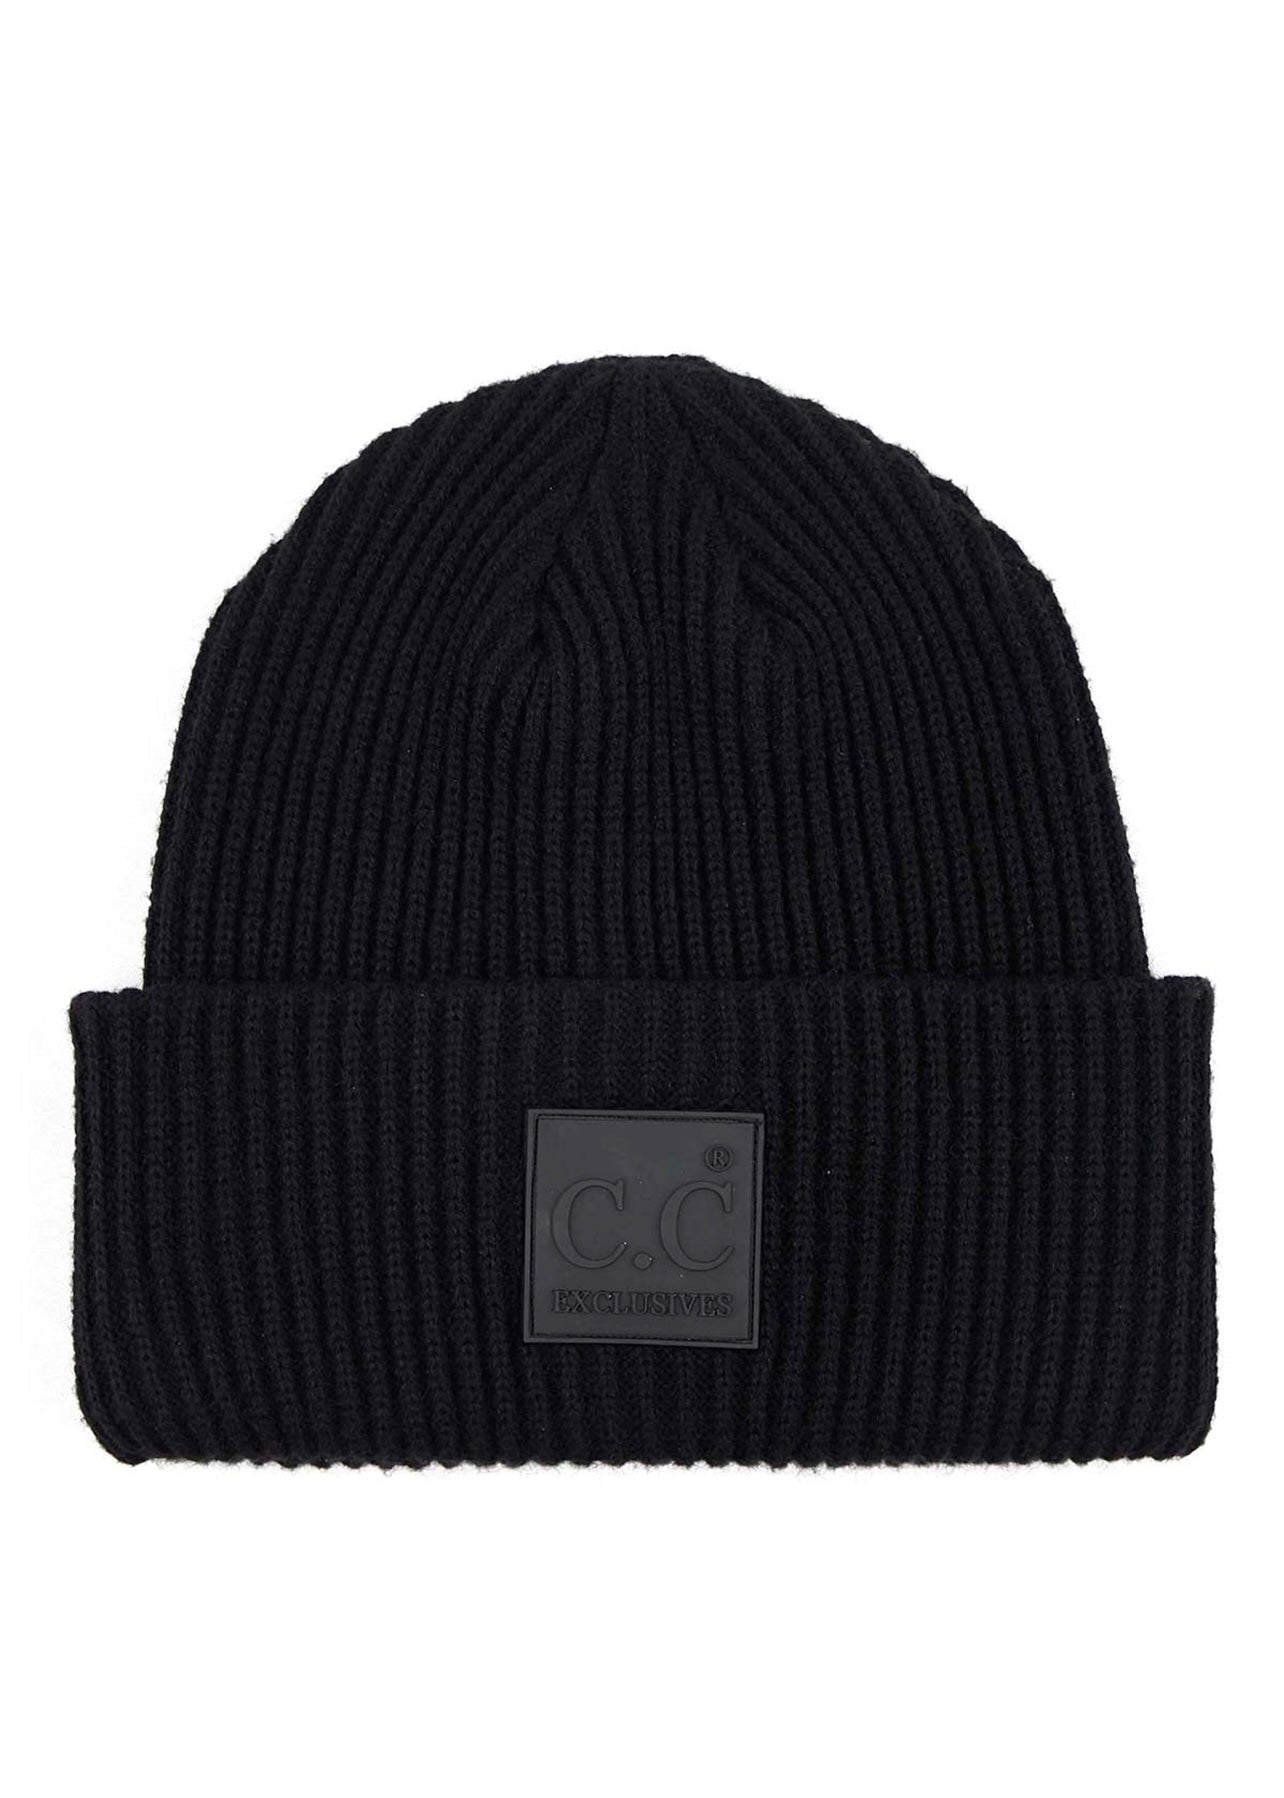 CC Solid Ribbed Knit Black Beanie